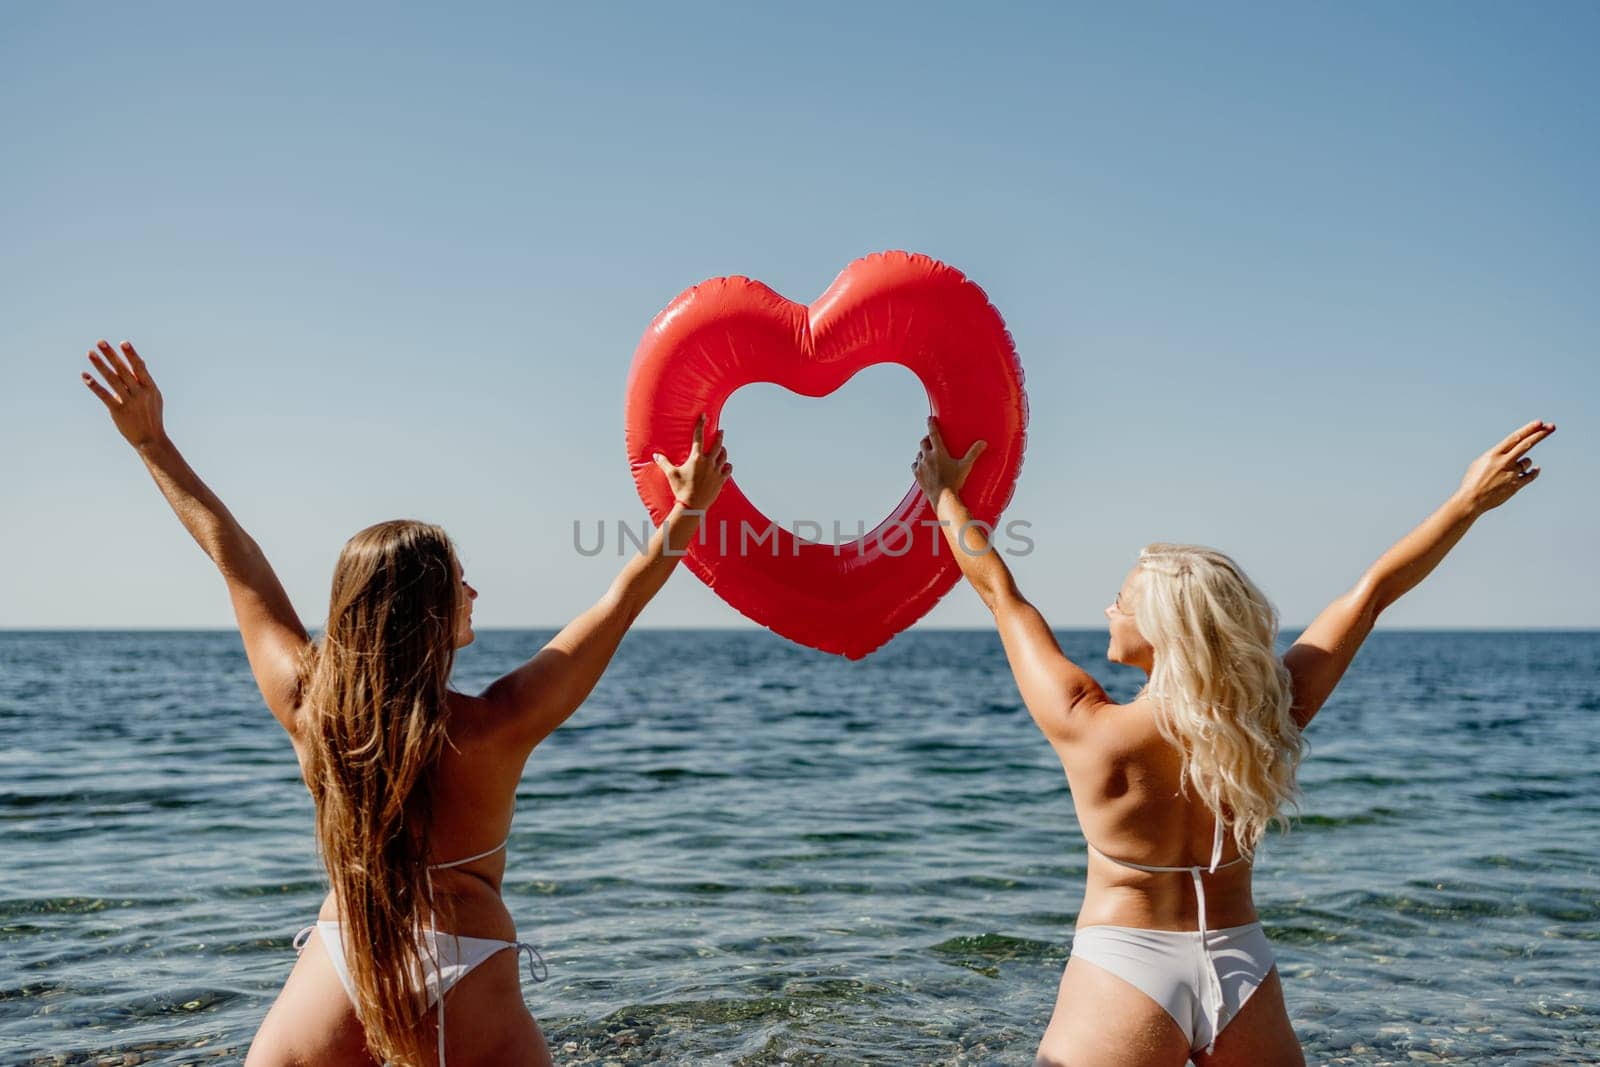 Two women are holding a red heart shaped inflatable raft in the ocean. They are smiling and seem to be enjoying themselves